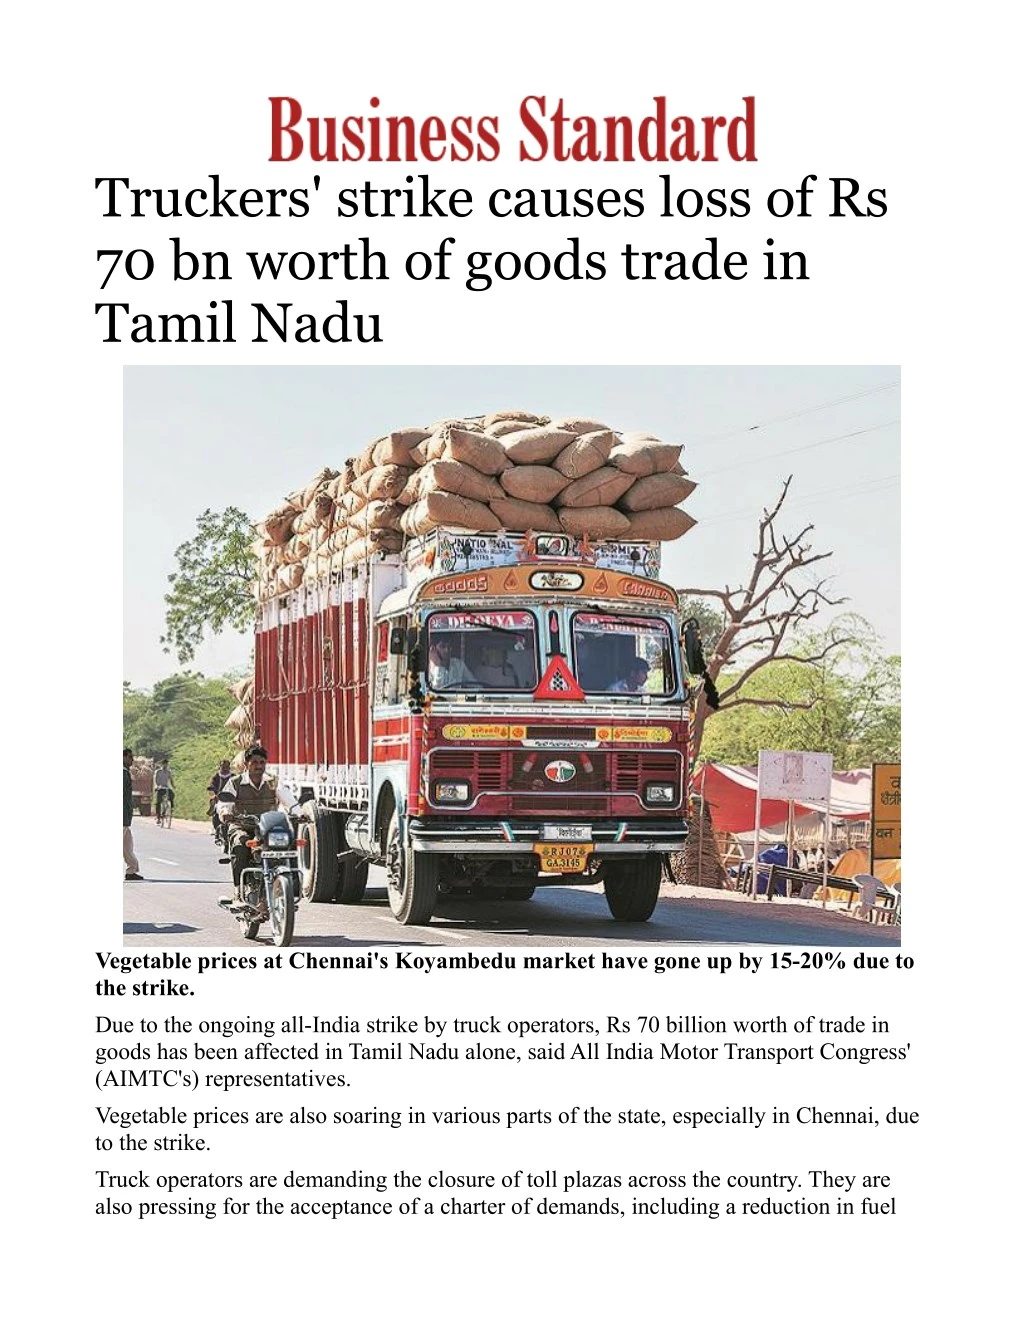 truckers strike causes loss of rs 70 bn worth